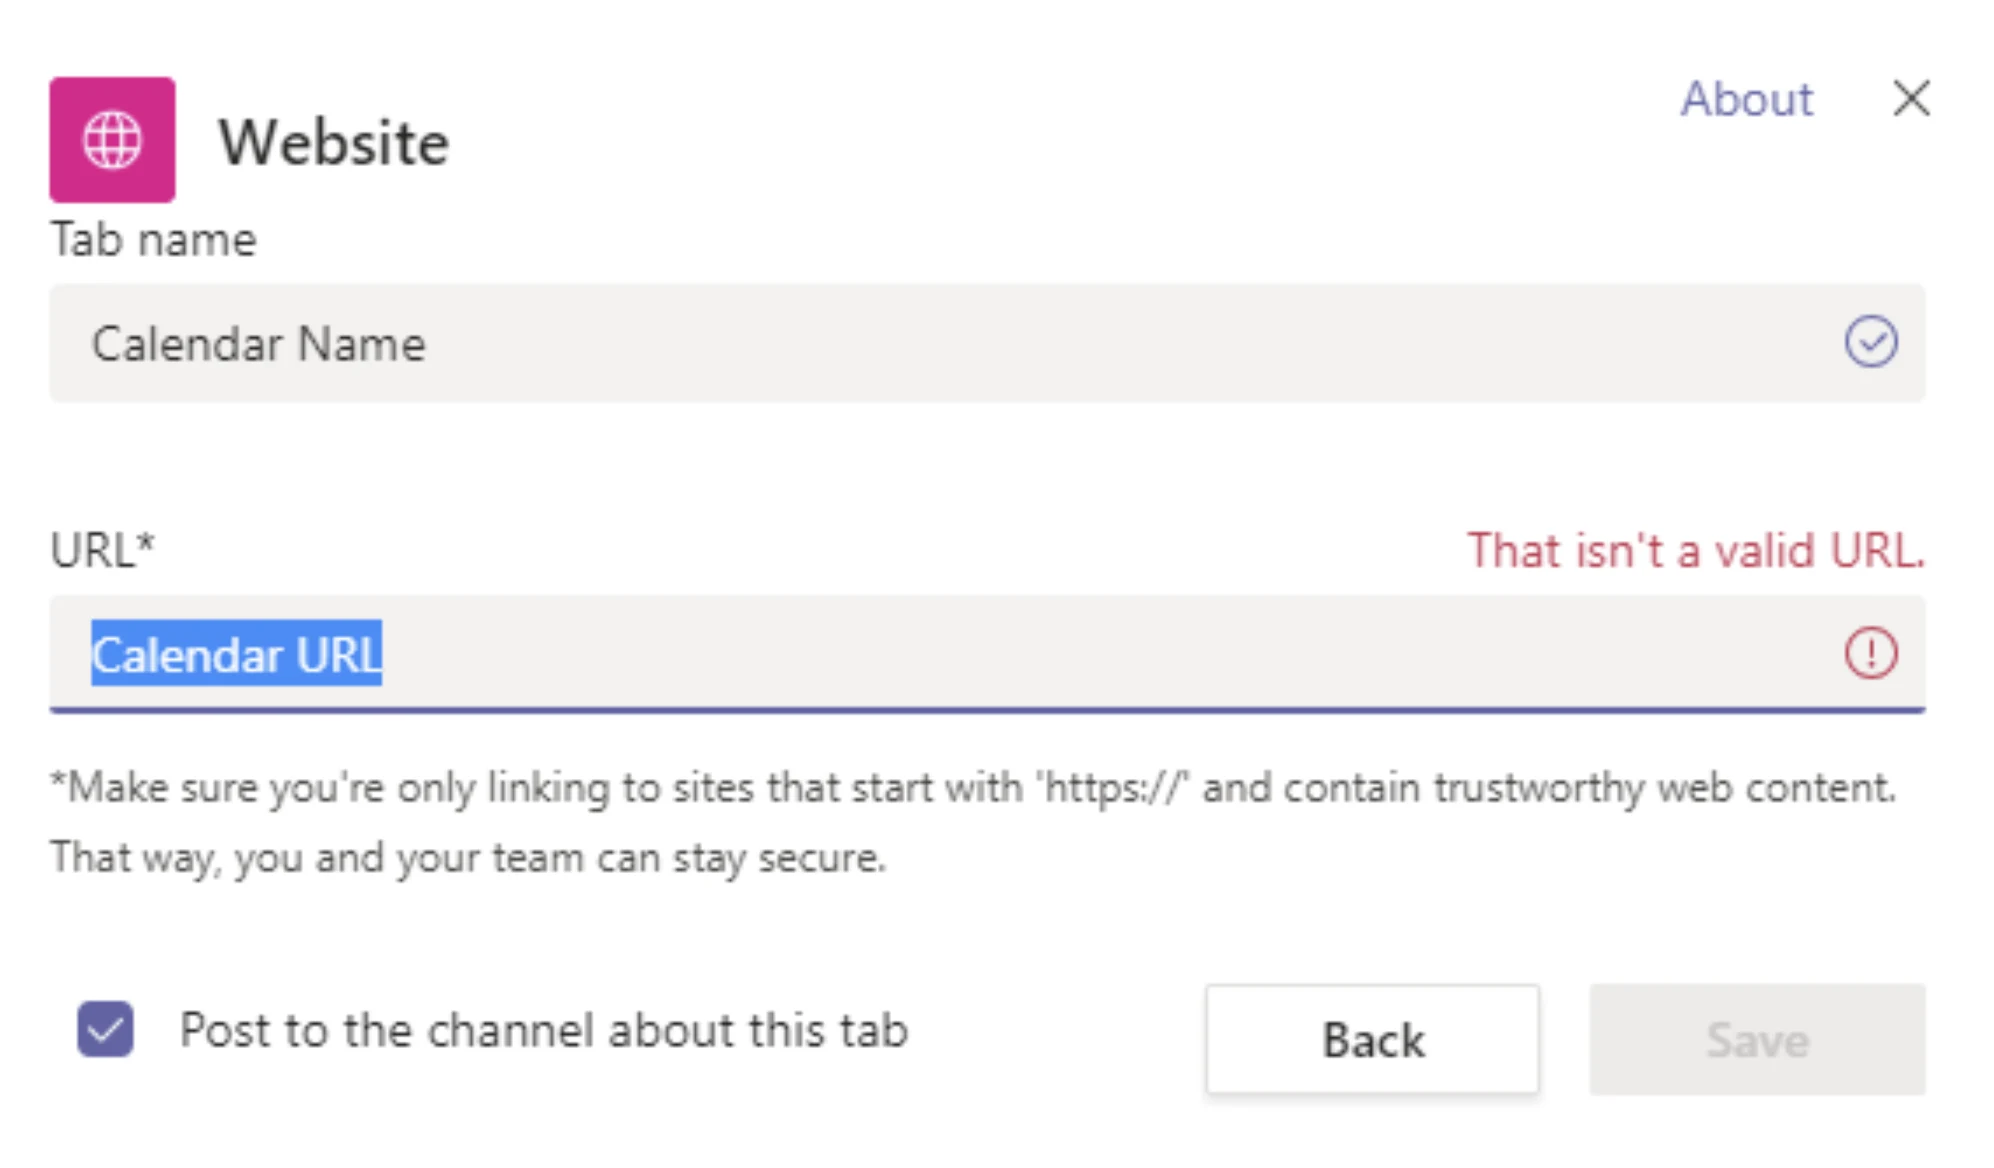 Screenshot of adding a website tab to a Microsoft Teams channel.